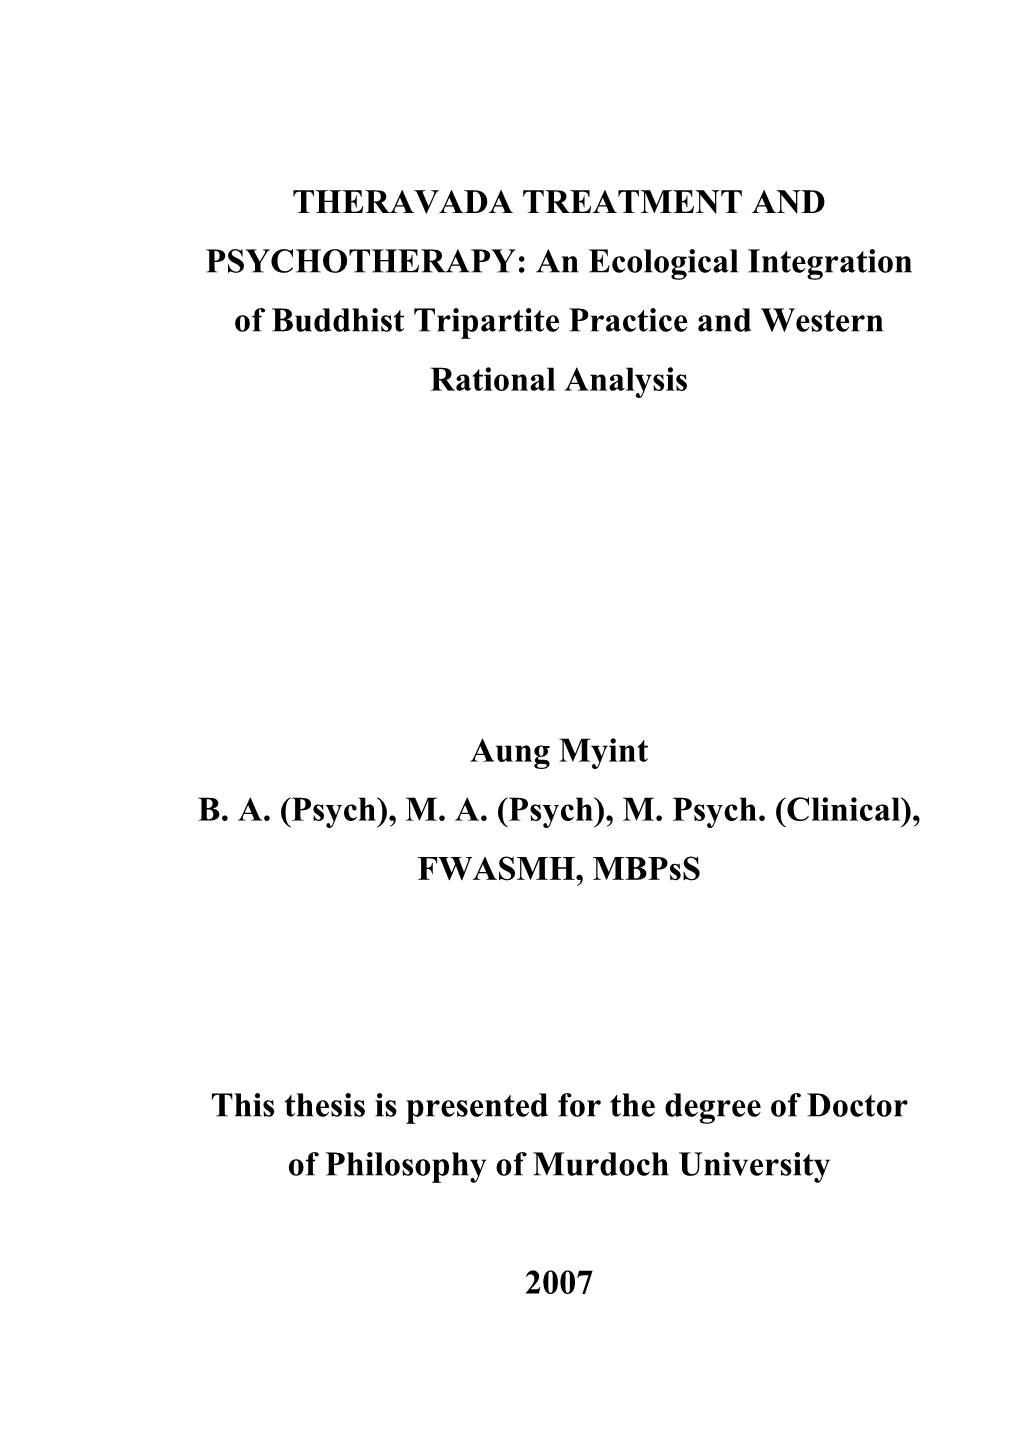 THERAVADA TREATMENT and PSYCHOTHERAPY: an Ecological Integration of Buddhist Tripartite Practice and Western Rational Analysis